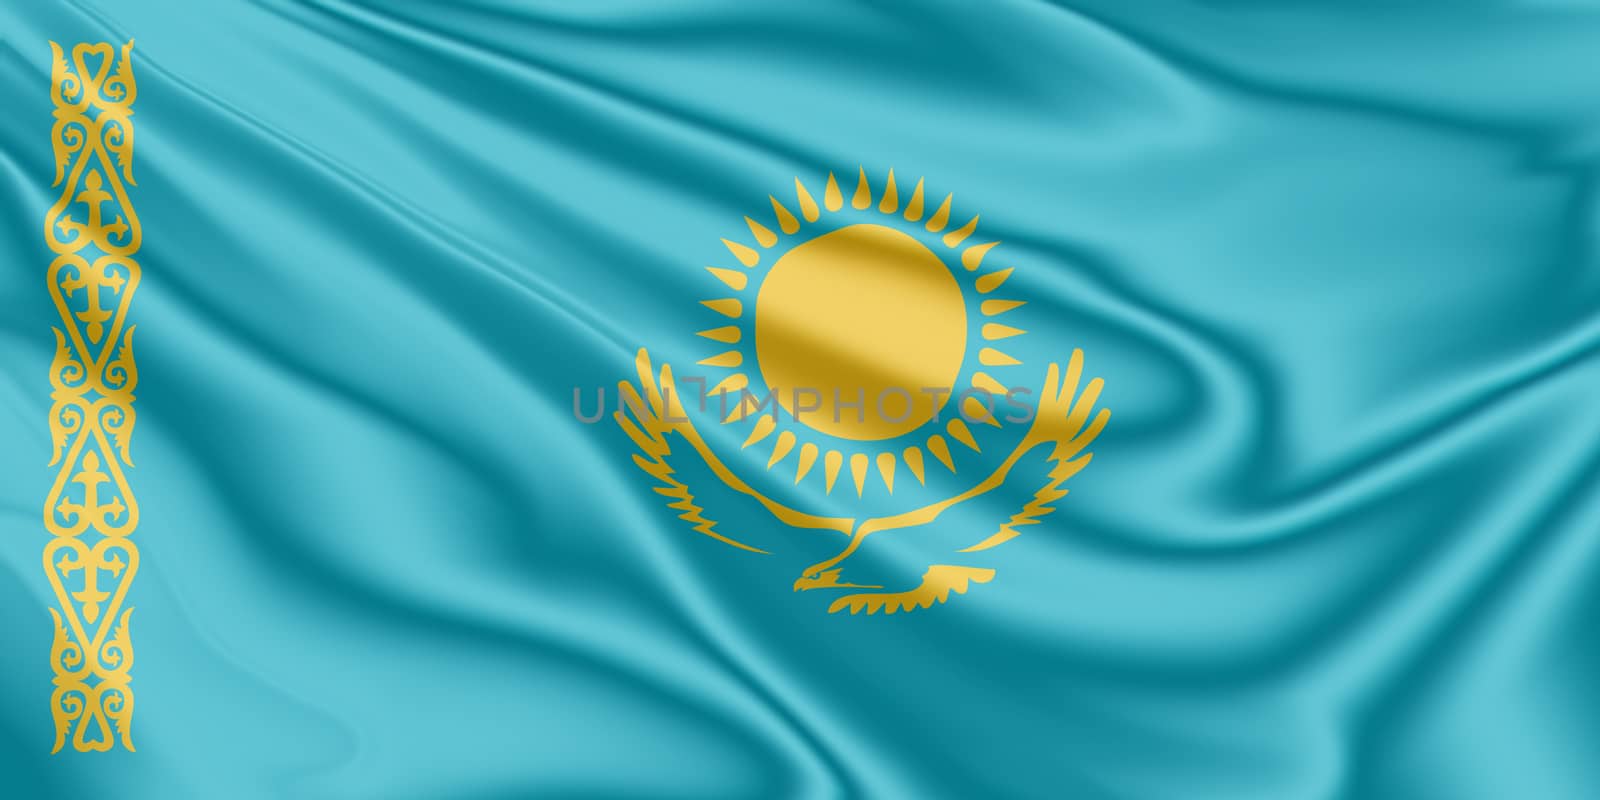 Flag of Kazakhstan fluttering in the wind in 3D illustration by raphtong